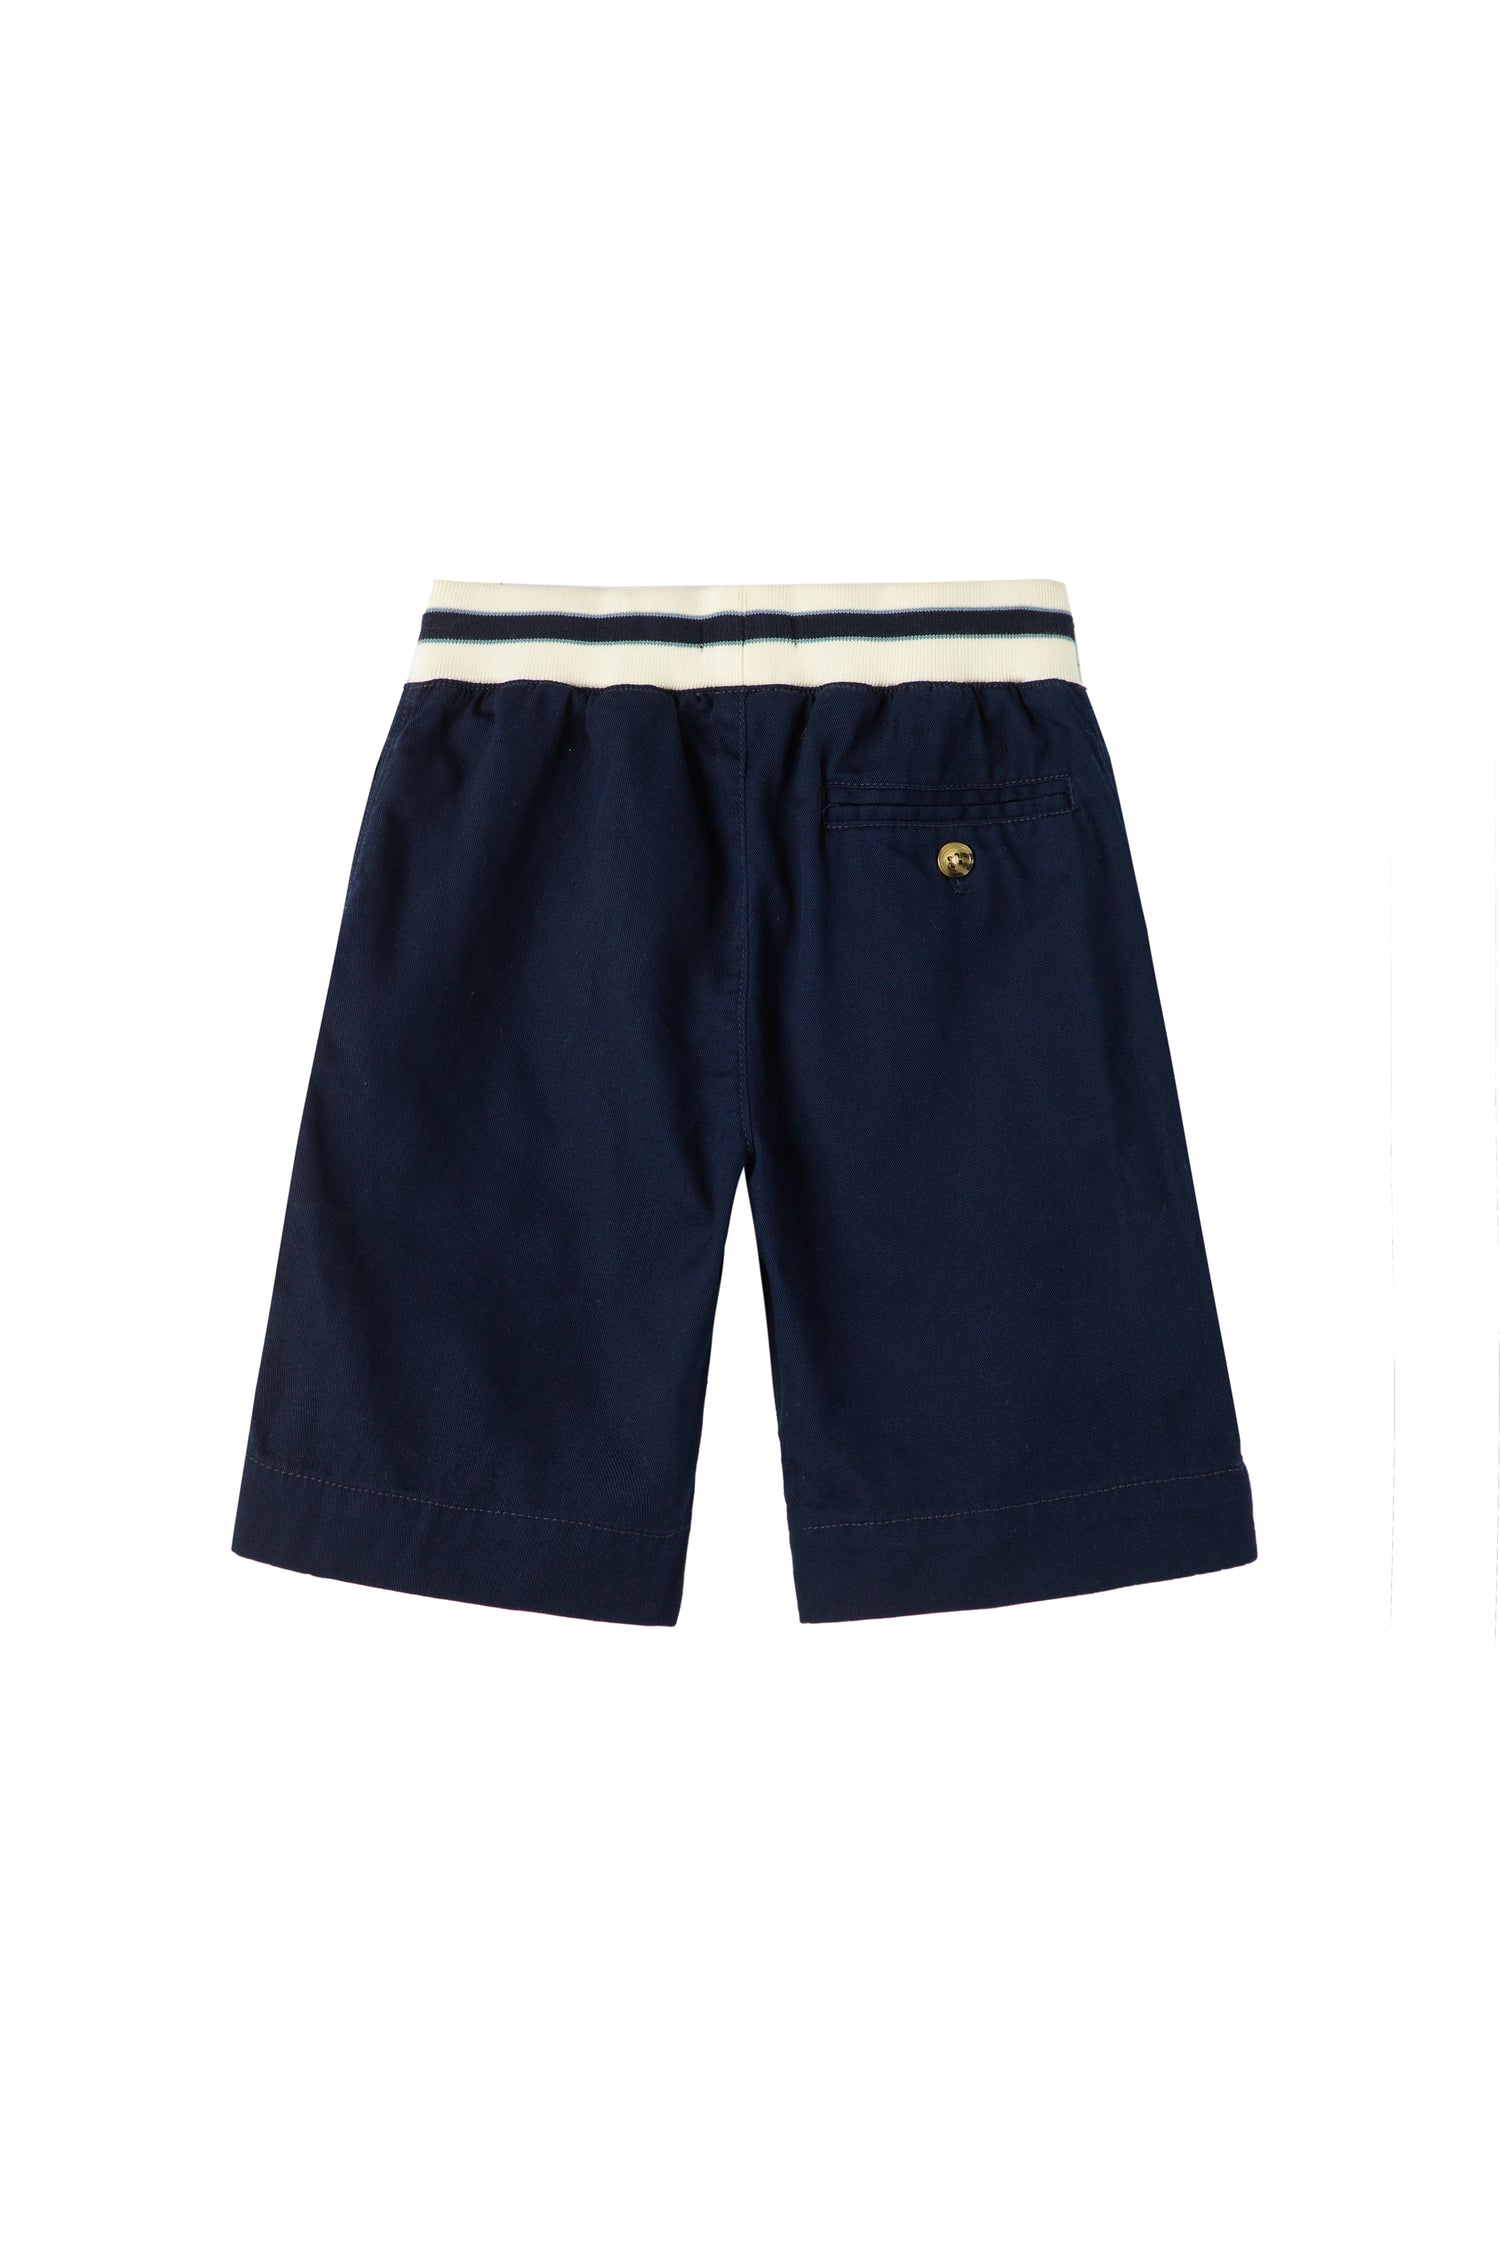 Back of navy pull on shorts with white-and-blue striped waistband